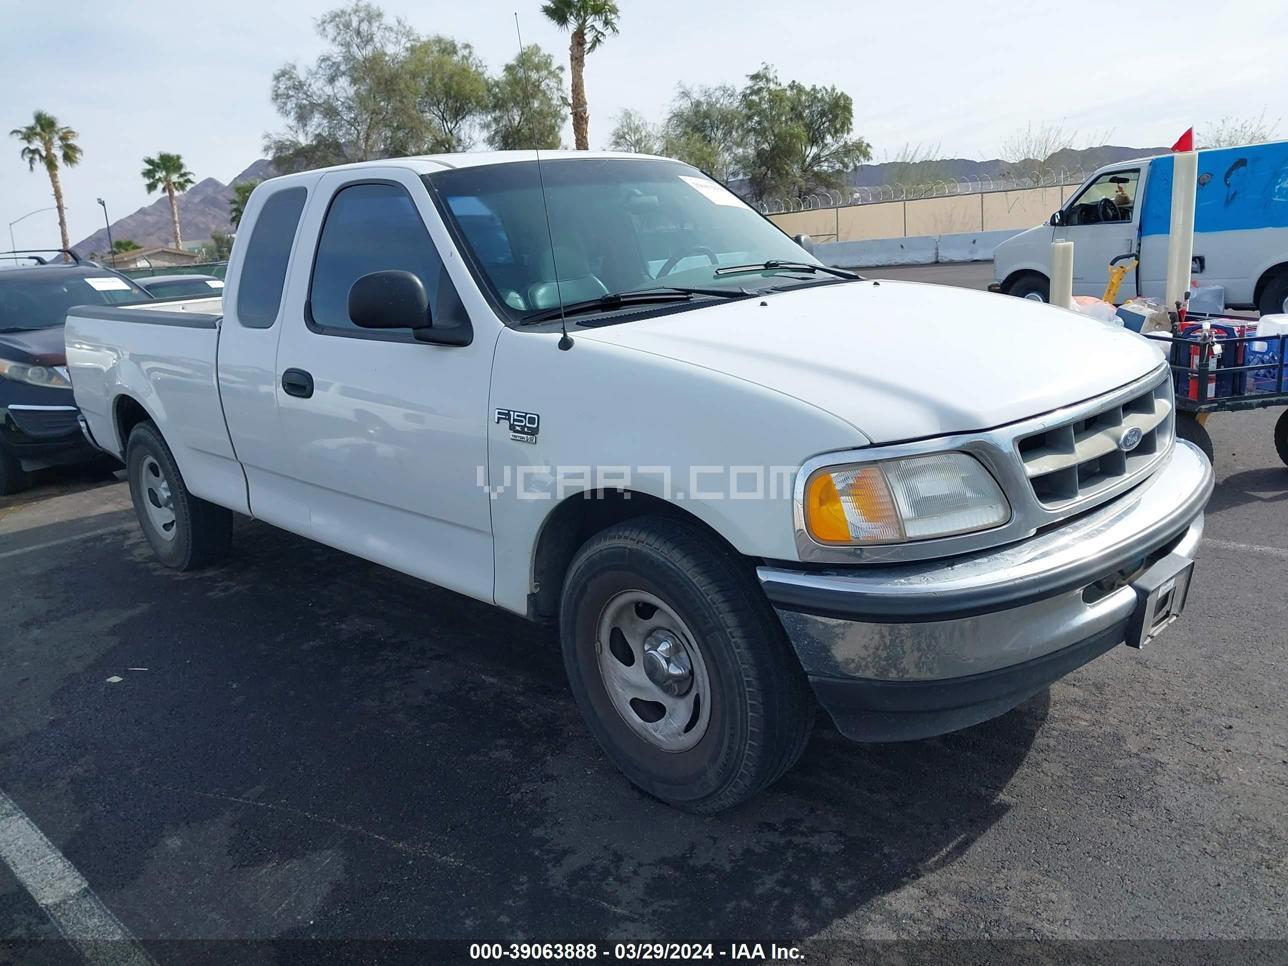 VIN: 1FTZX1767WKB36447 - ford f-150